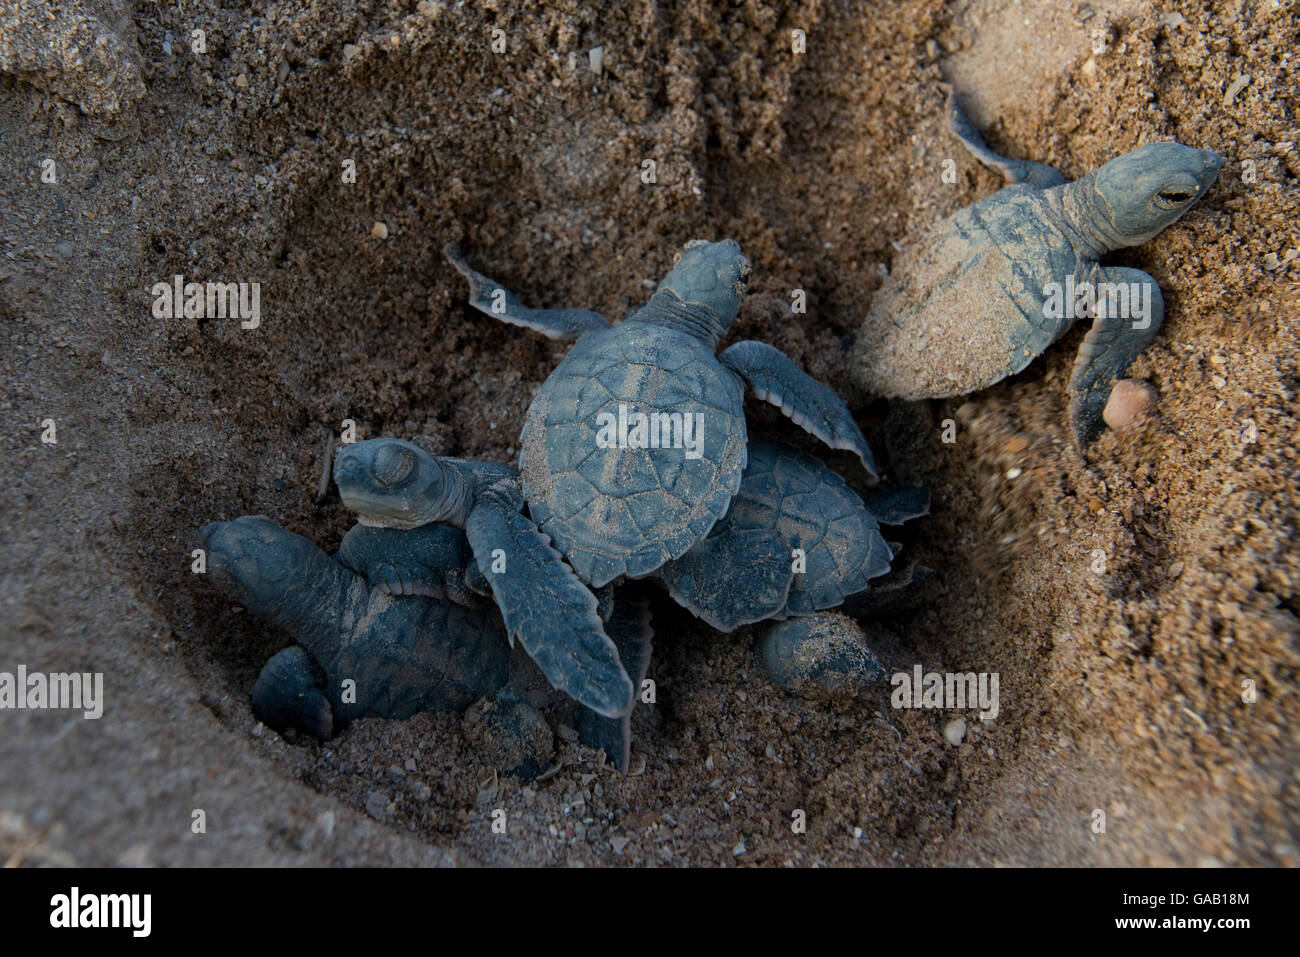 Green turtle (Chelonia mydas) hatchlings emerging from nest,  Bissagos Islands, Guinea Bissau. Endangered species. 3rd Place in Stock Photo